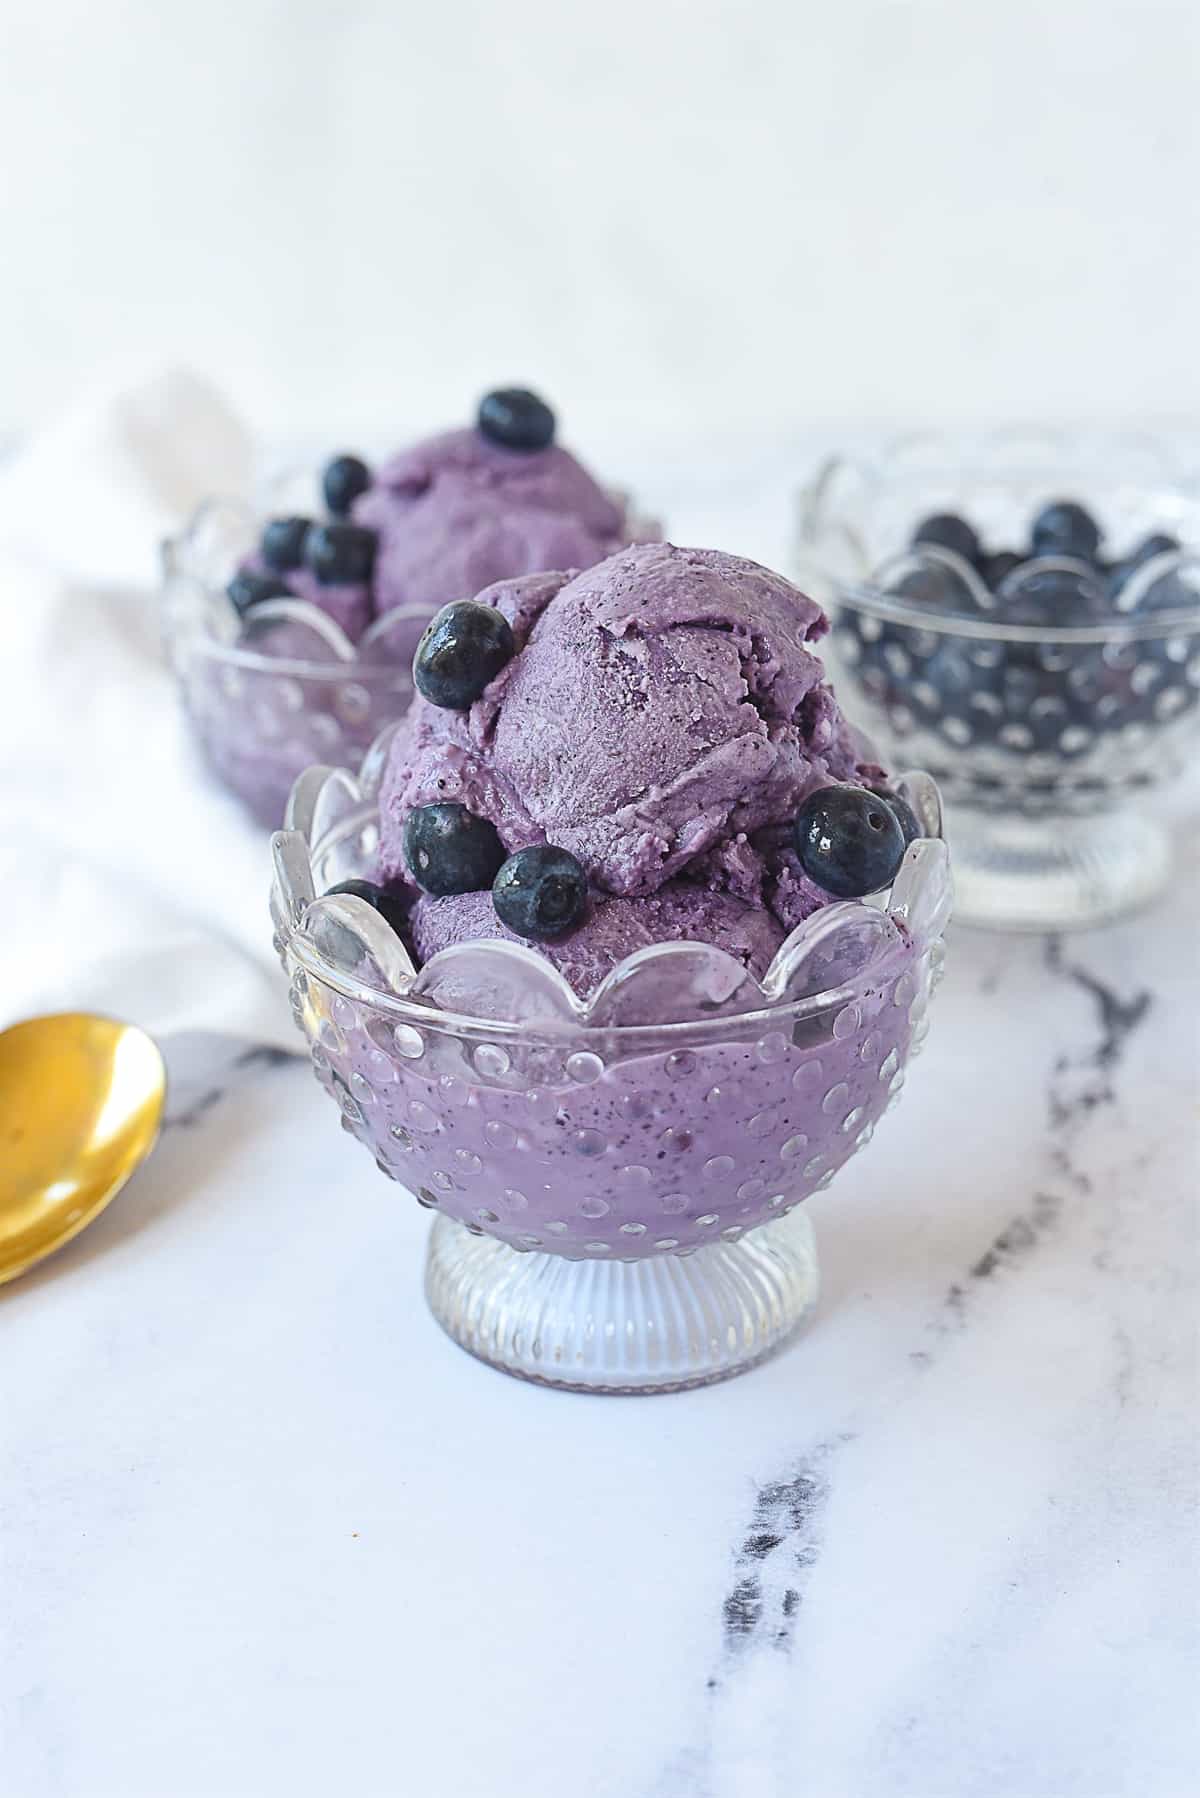 10 Ways to Cook with Blueberries